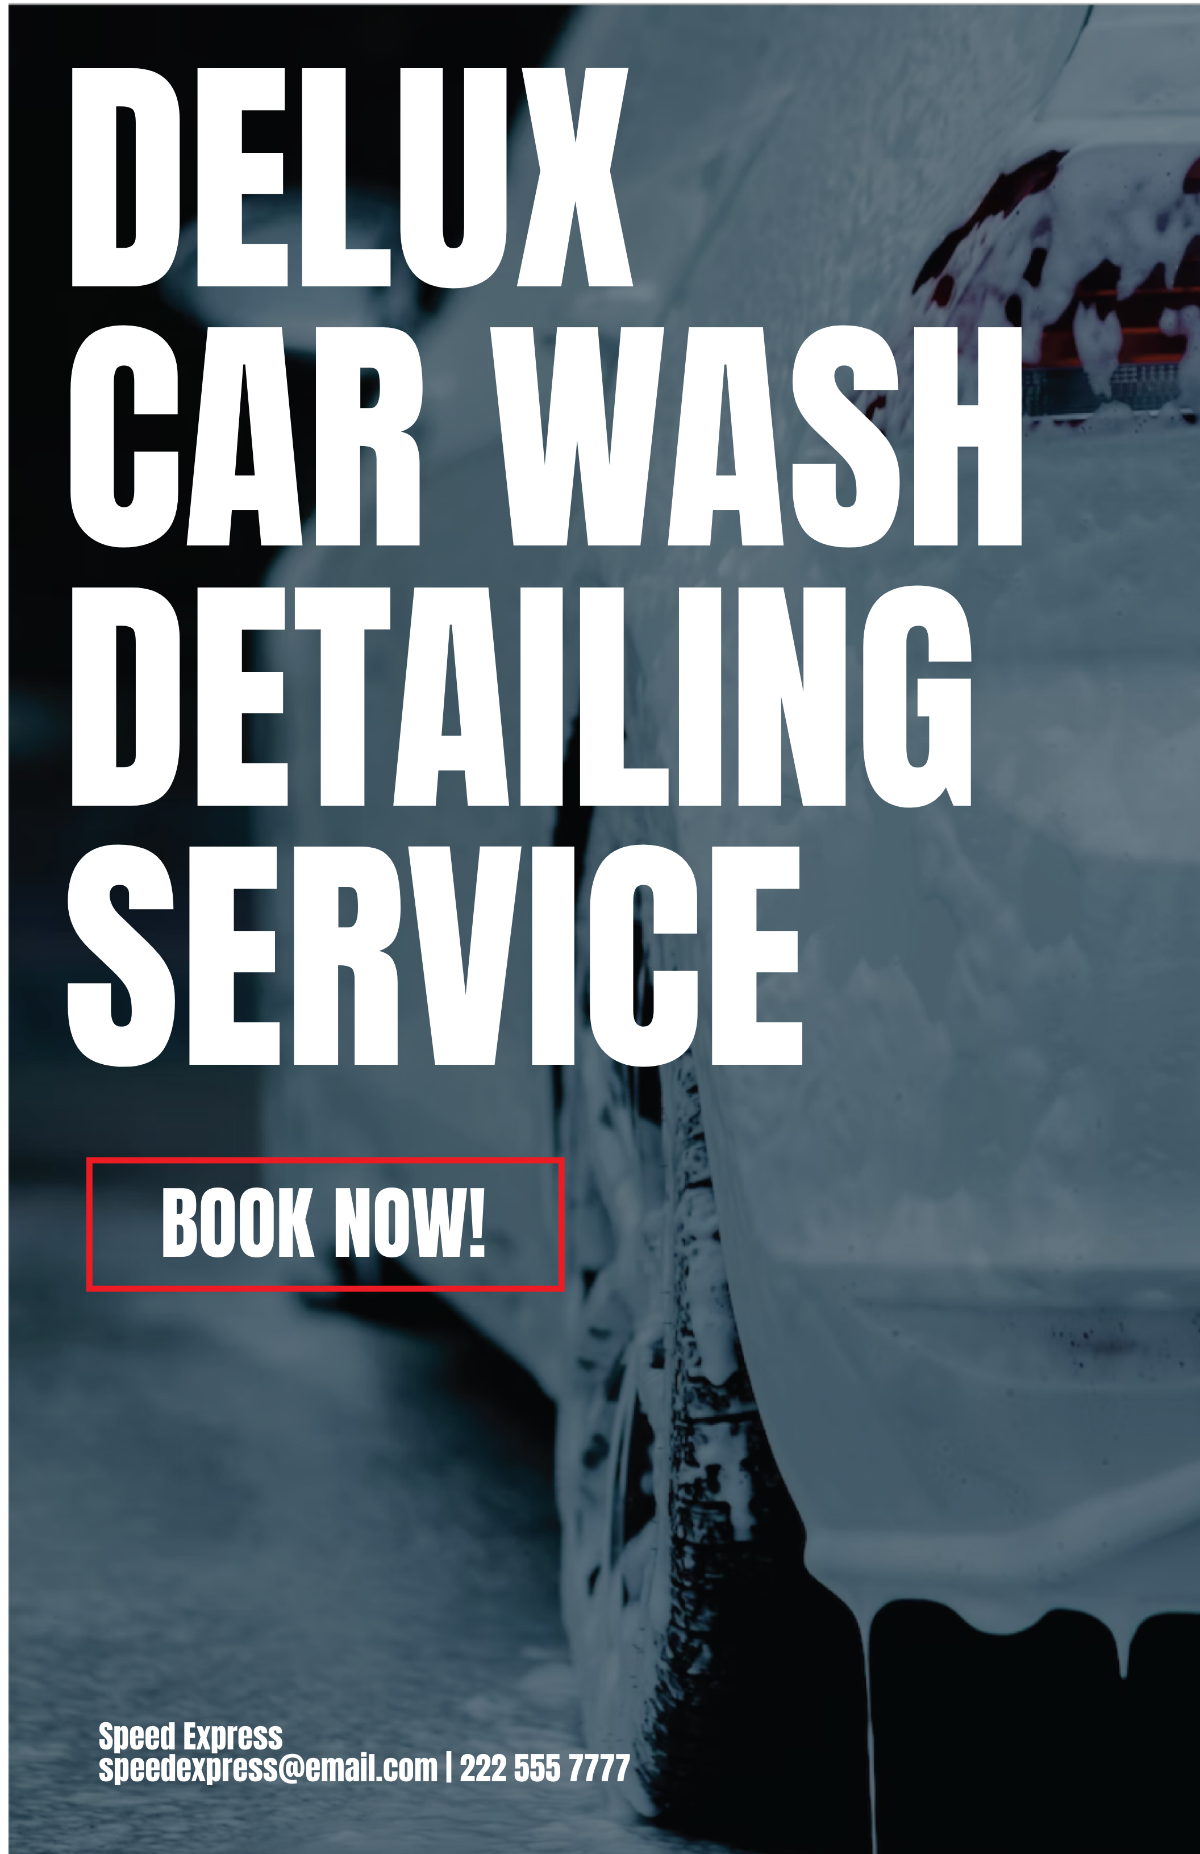 Free Car Wash Detailing Service Poster Template